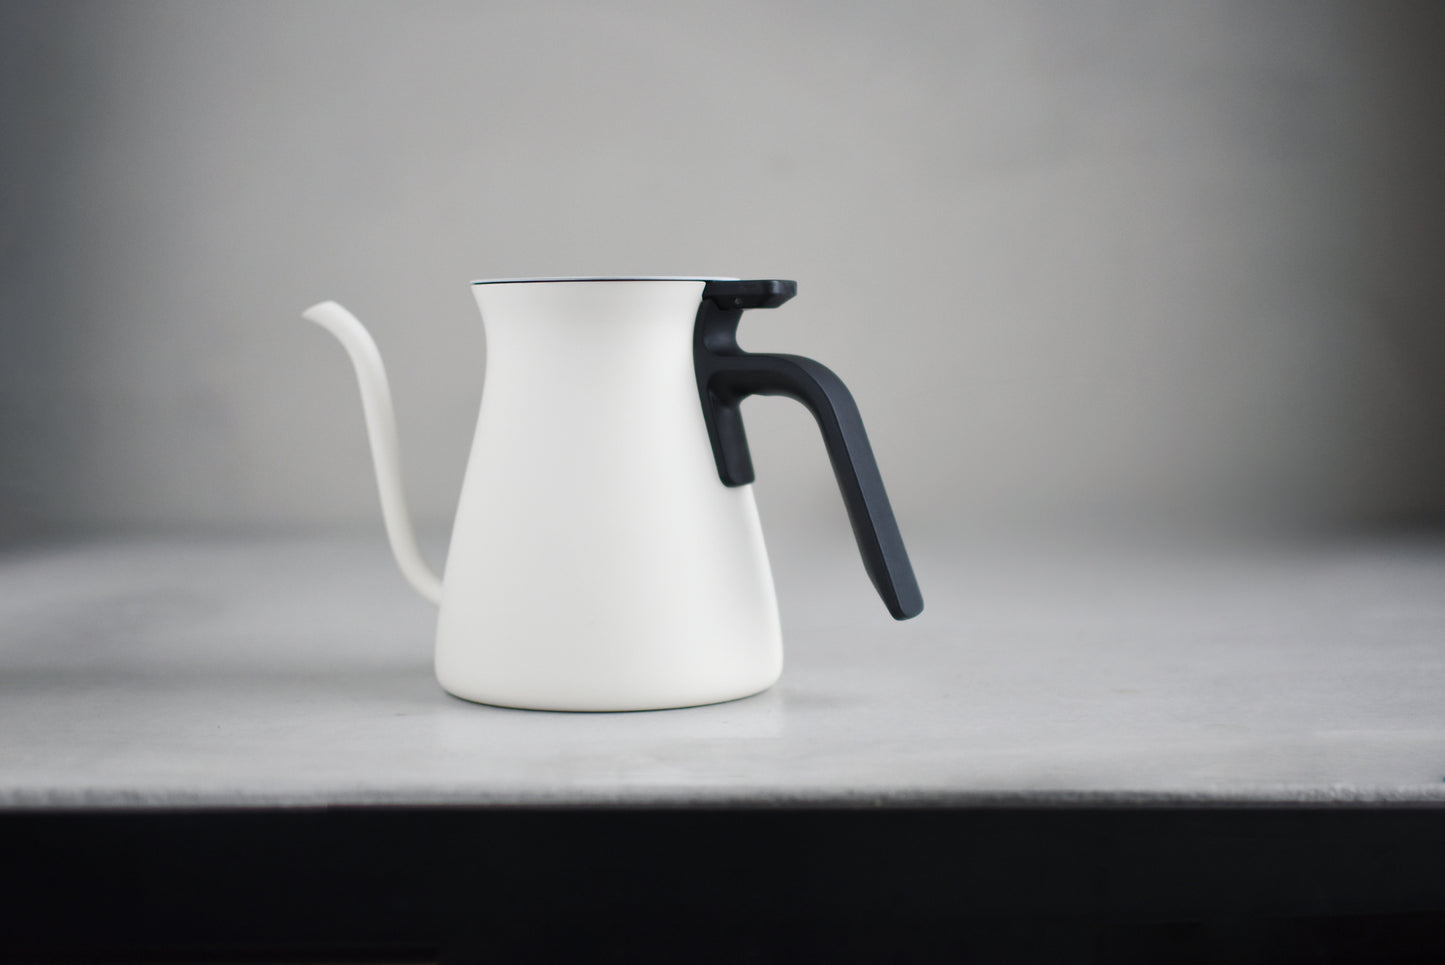 Pour Over Kettle